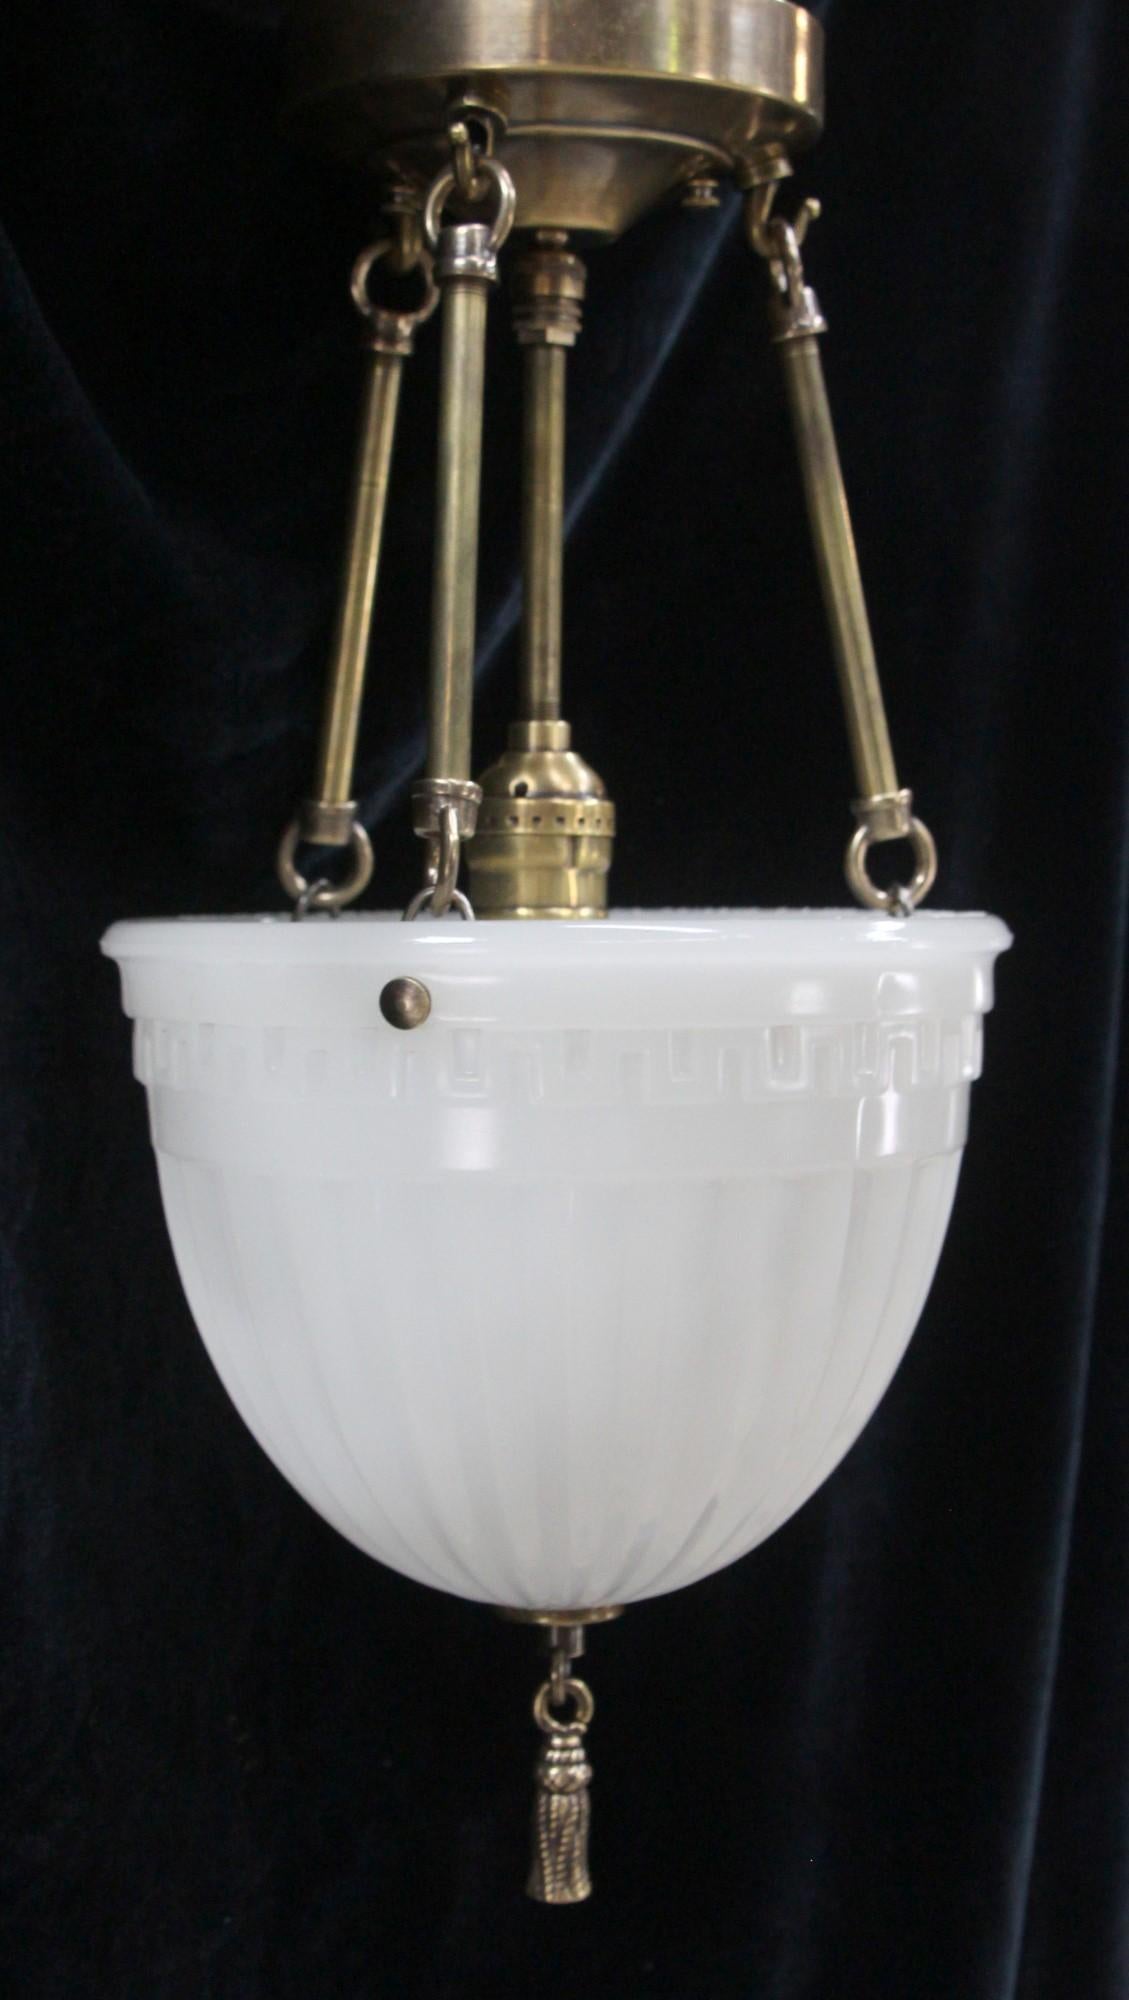 Original 1910s milk glass shade featuring Greek key detail reworked with new wired brass fitter to complete a hanging pendant light. It's brass rope tassel also gives it a nice additional accent. Cleaned ad rewired. Small quantity available at time